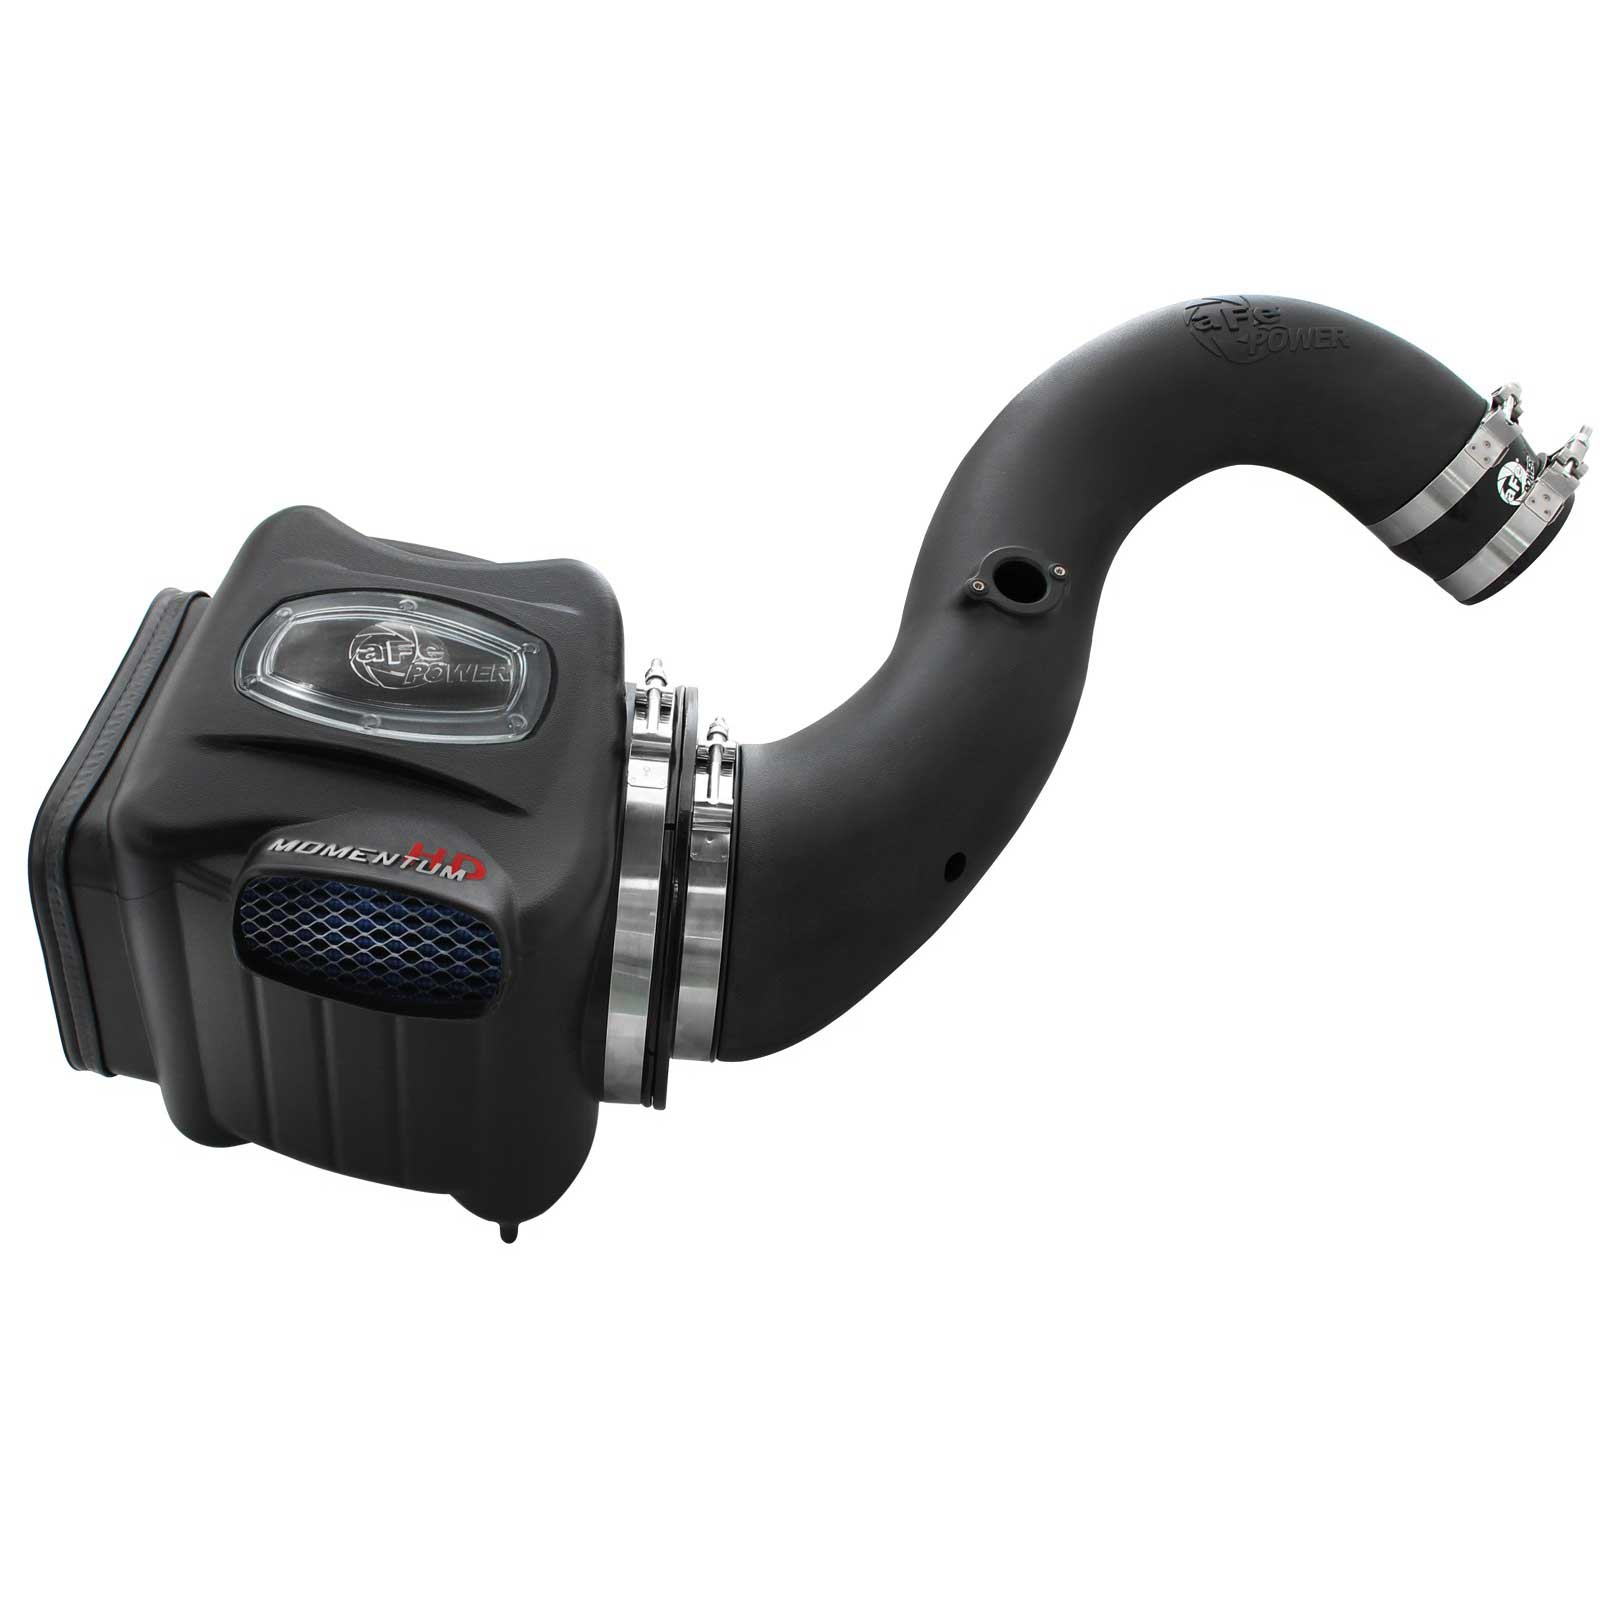 '04-05 Chevy/GMC 2500/3500 HD V8 6.6L Momentum HD Cold Air Intake System w/Pro 10R Filter AFE Power display